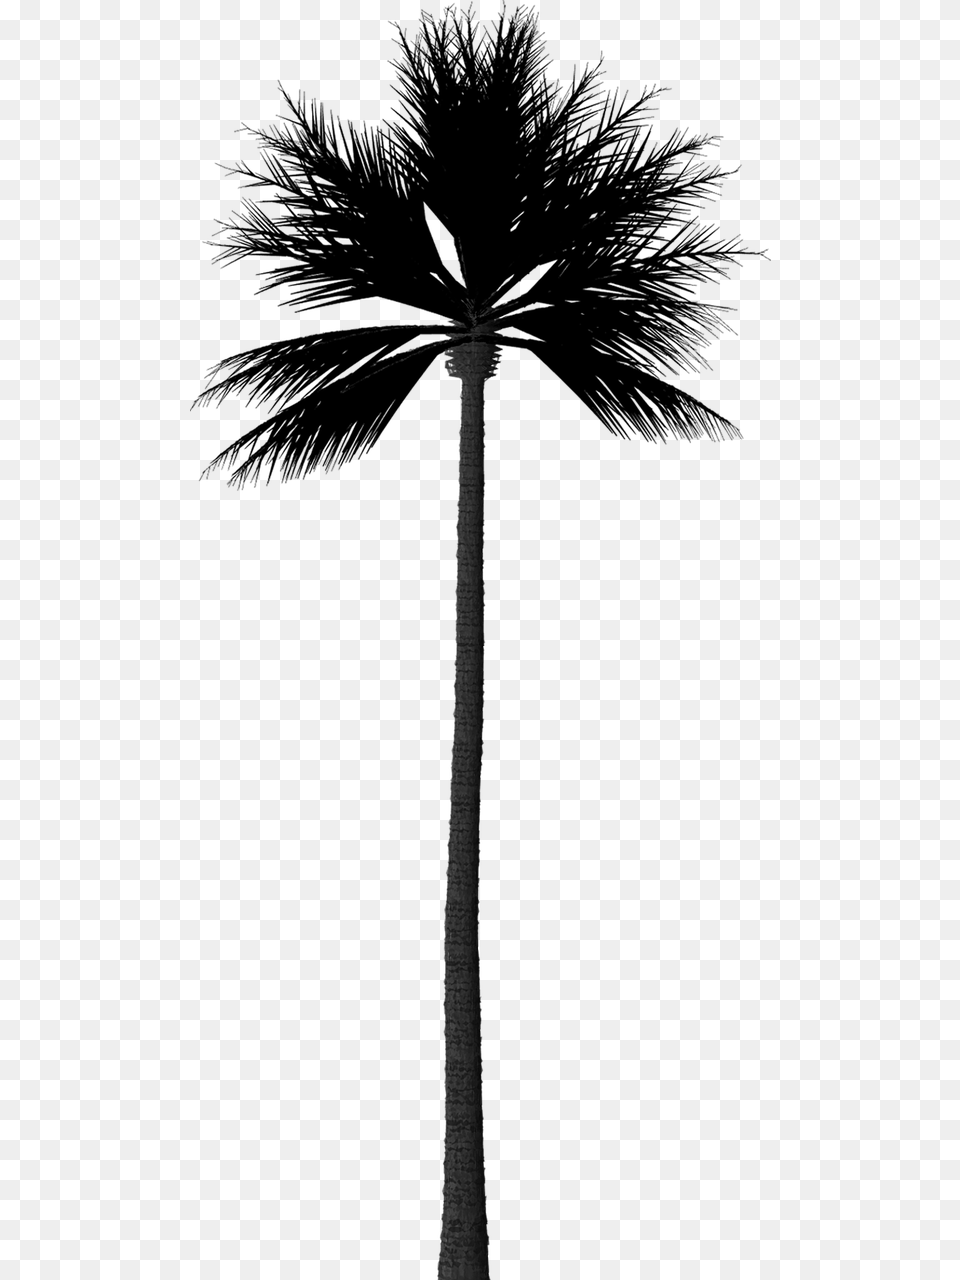 Photoshop Palm Tree Silhouette Png Image